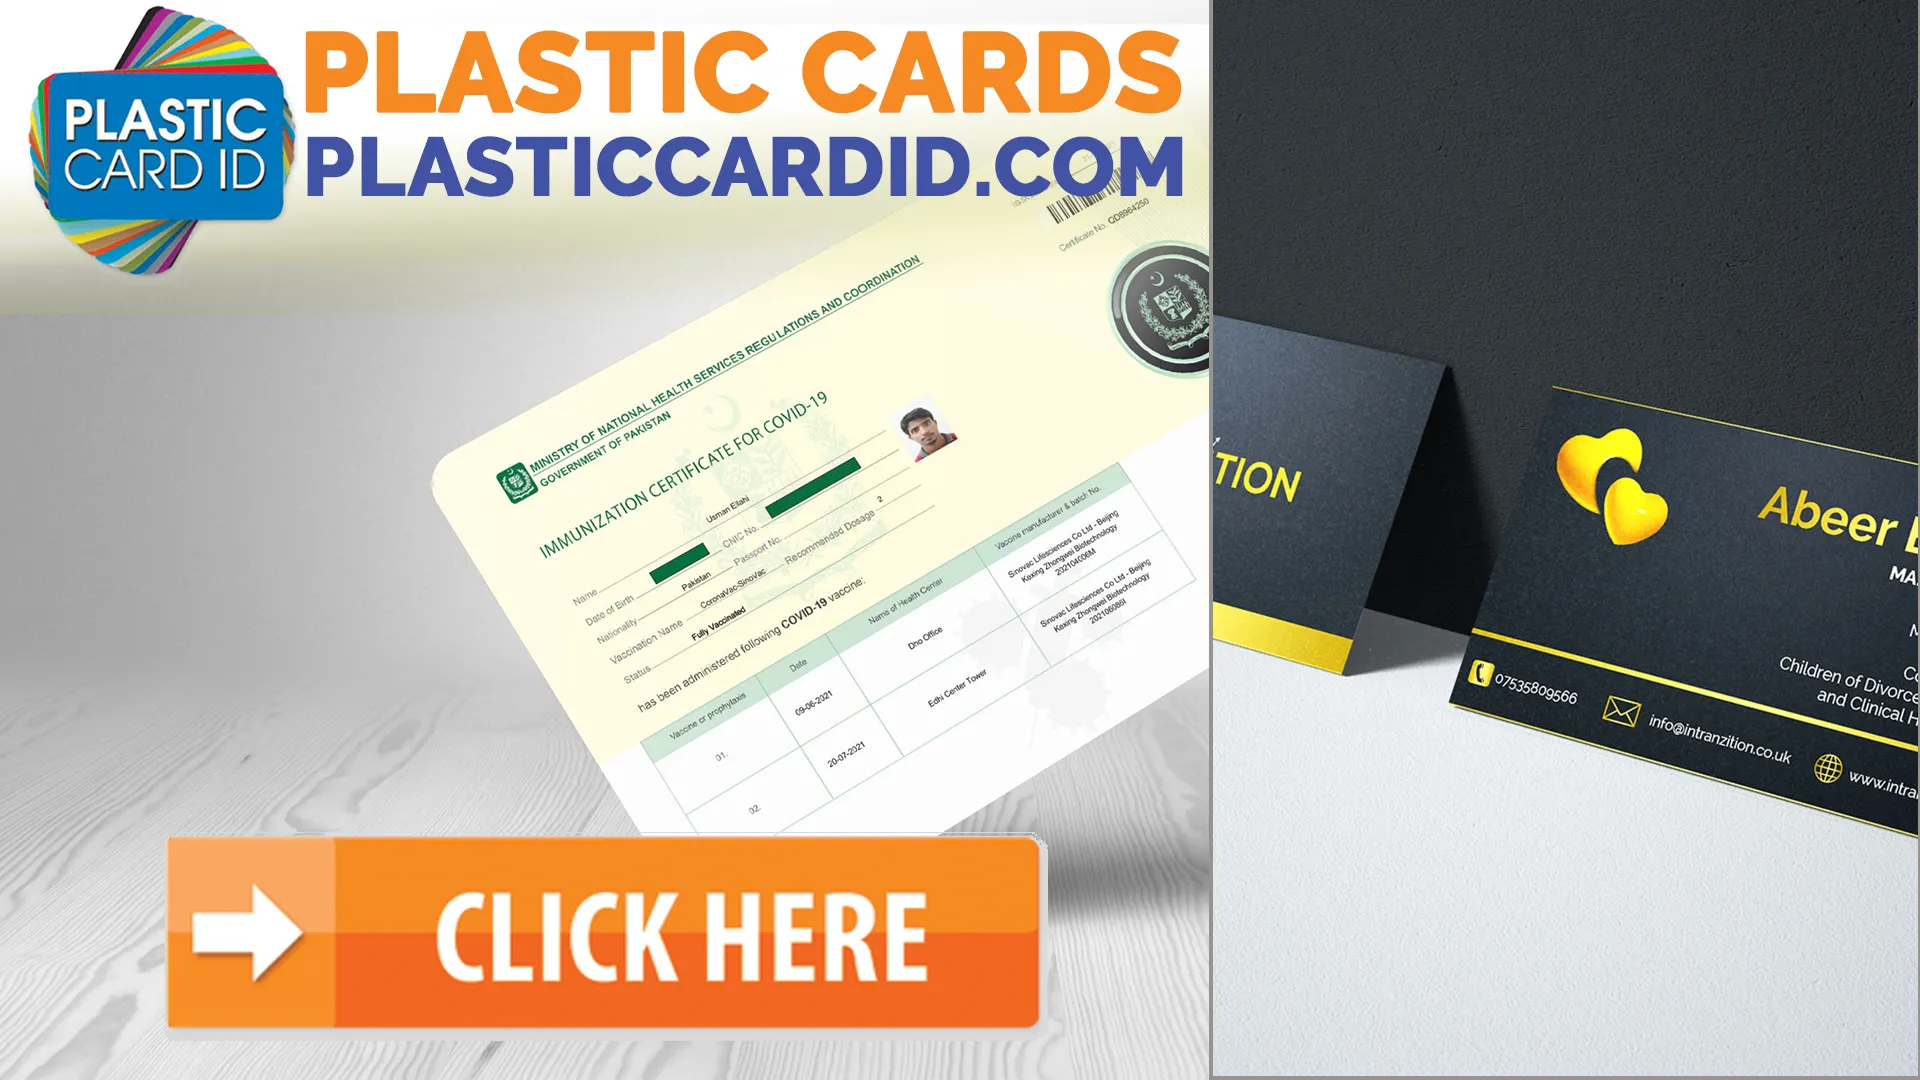 Discovering Global Frontiers with Plastic Cards